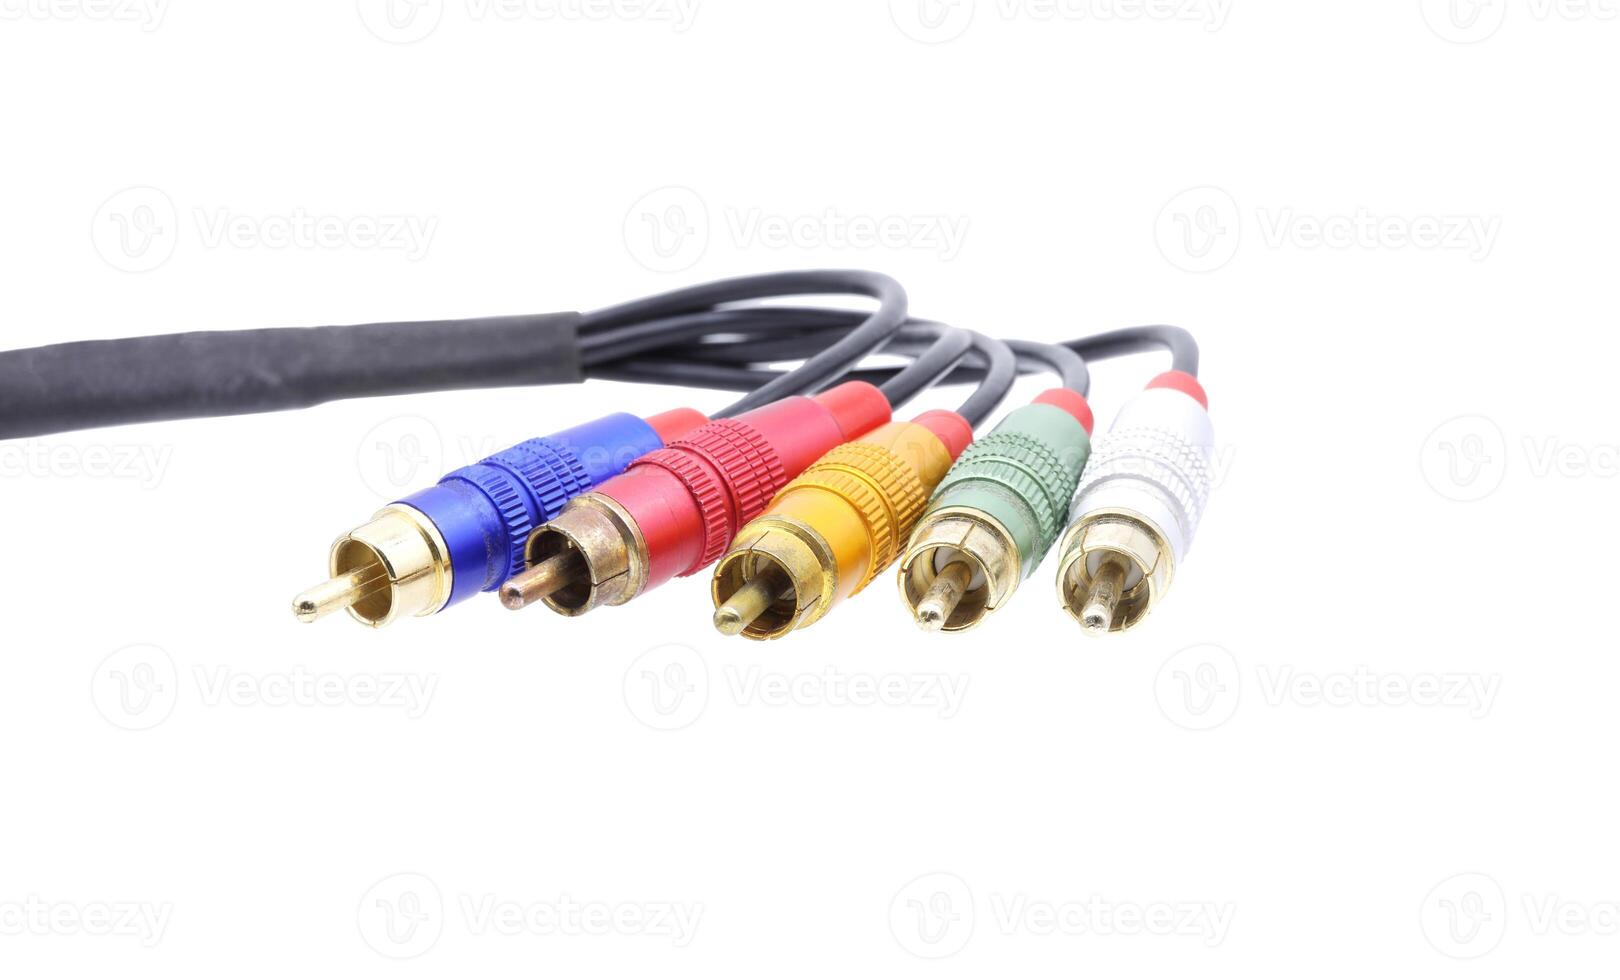 Multicolored AV cable connectors isolated on white background. photo